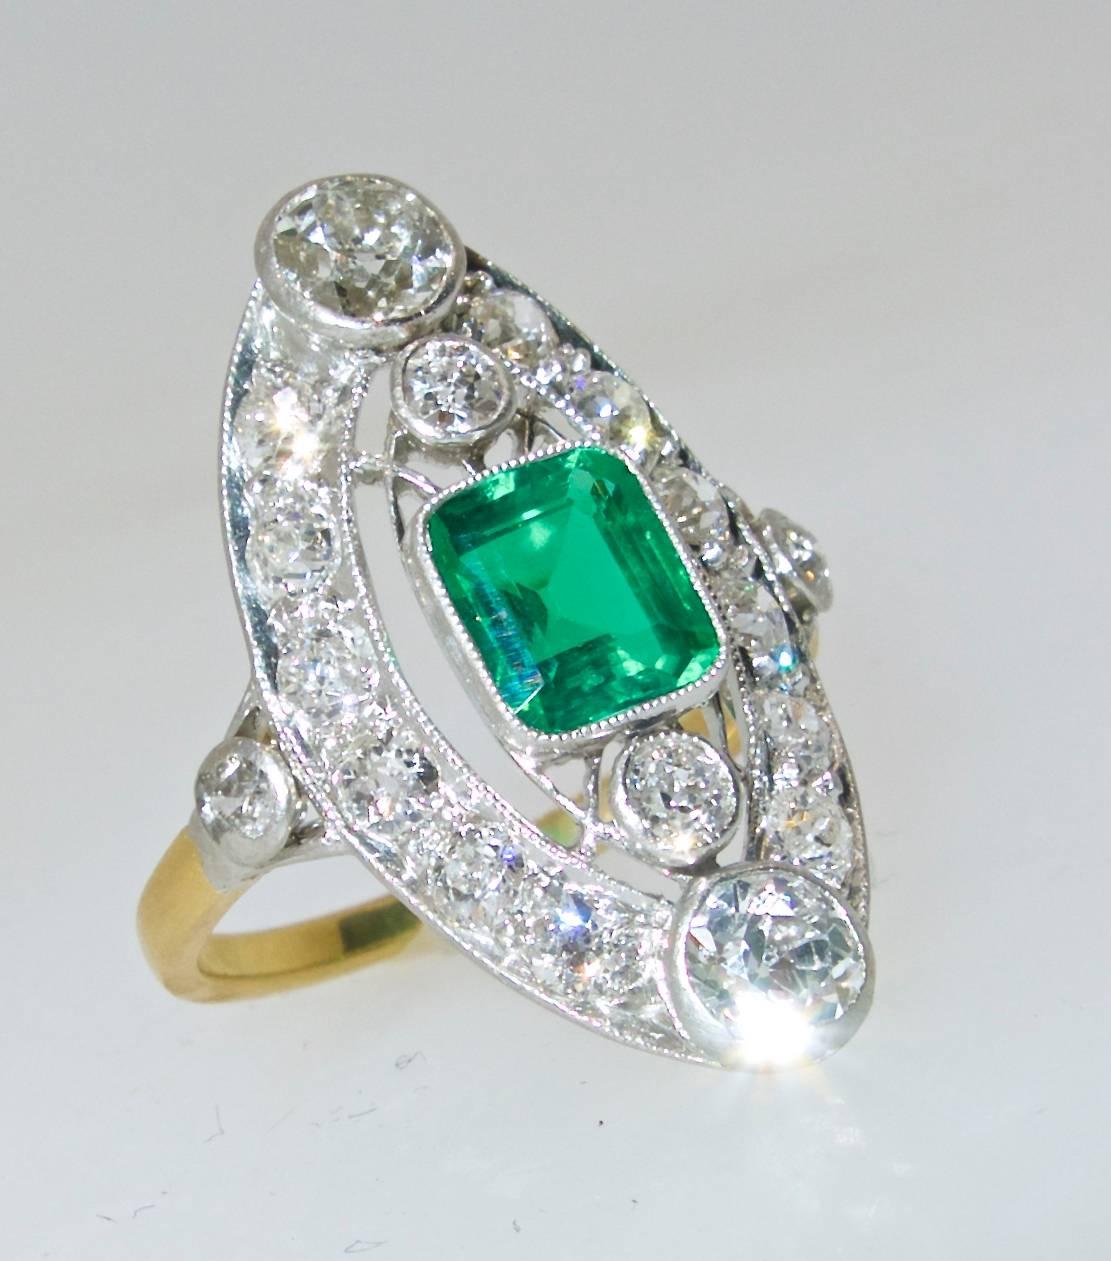  Platinum ring possessing a superb .91 ct. Colombian emerald with an AGL certificate stating treatment as:  None!  In todays market this is extremely rare.  The 18 old cut diamonds weigh approximately .91 cts.  This Belle Epoche ring is both 18K